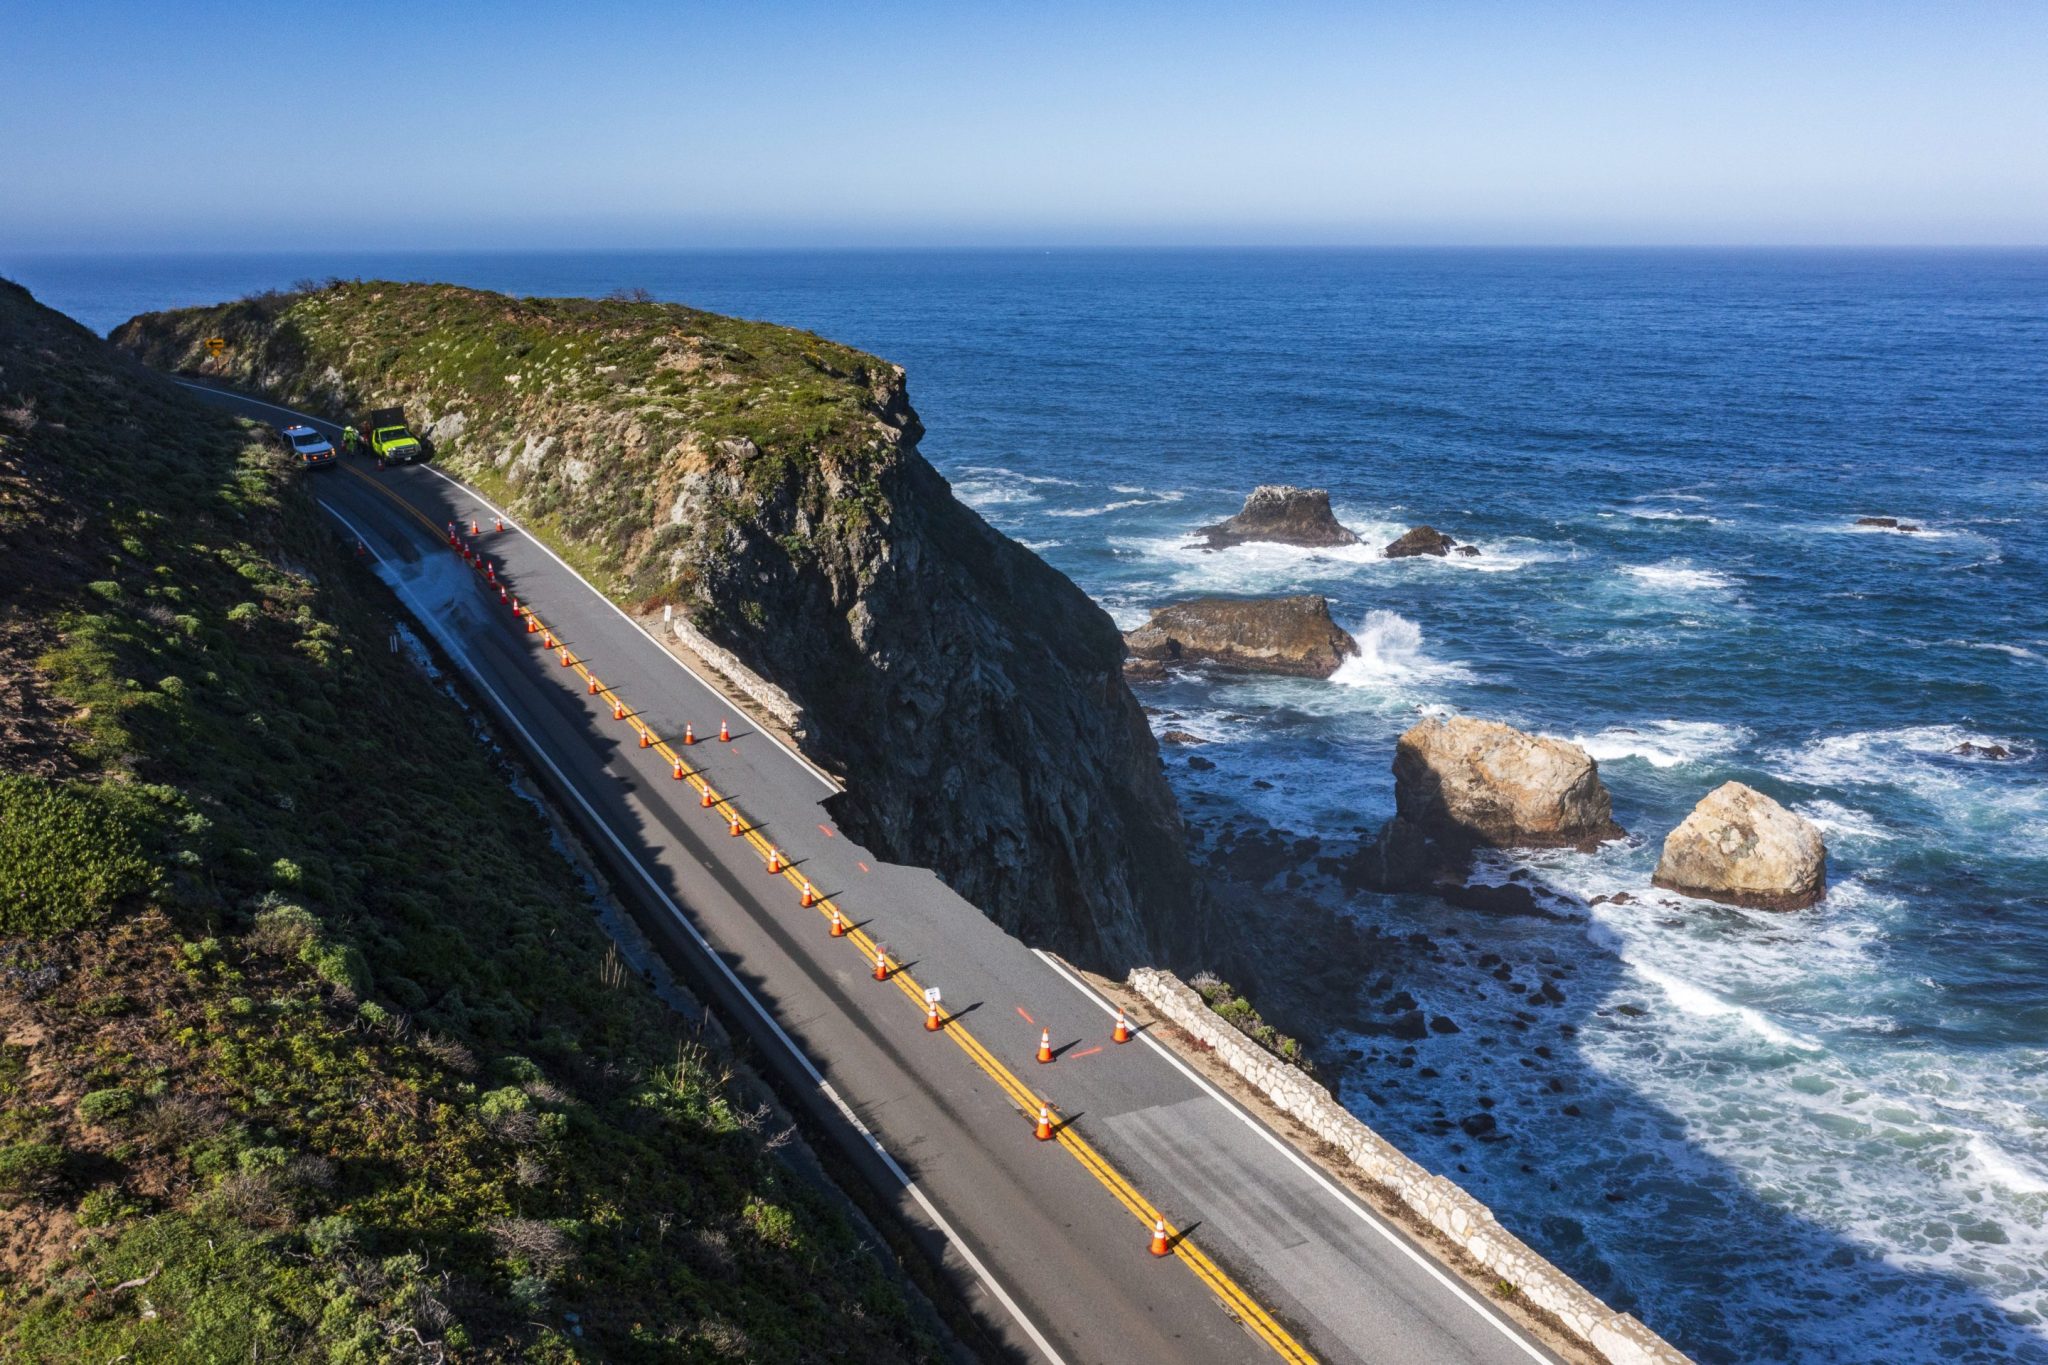 California’s Highway 1 near Big Sur collapses into the ocean, shrinking traffic to one lane